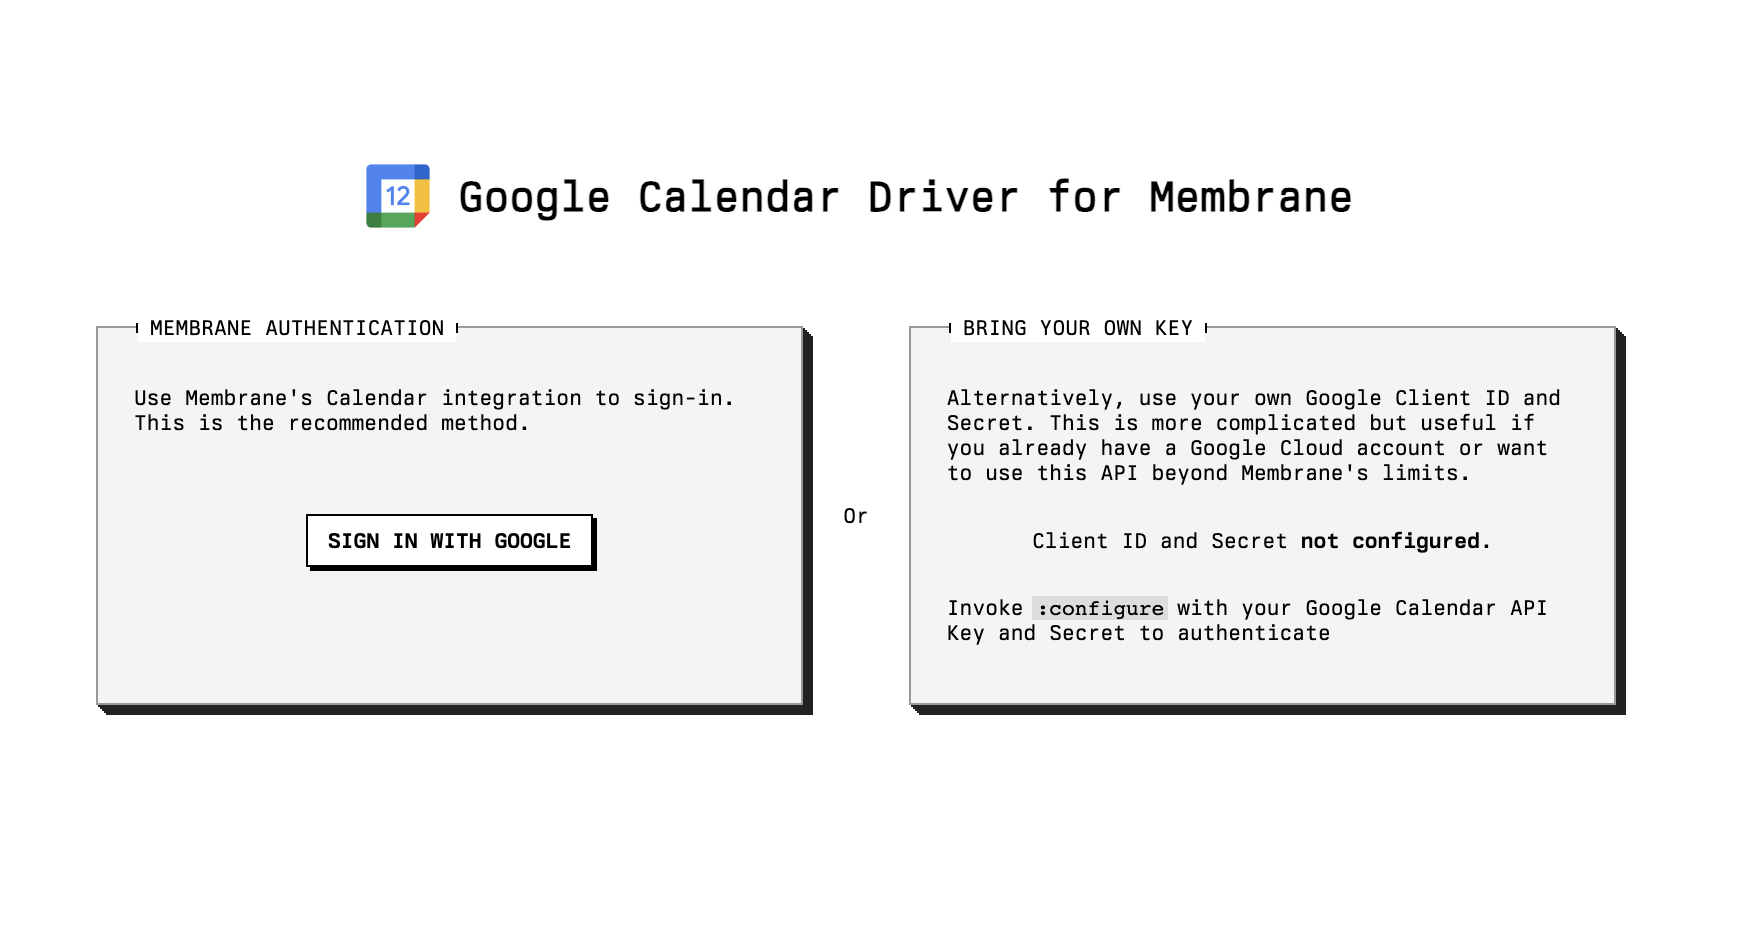 A screenshot of the Google auth page in the Google Calendar Driver